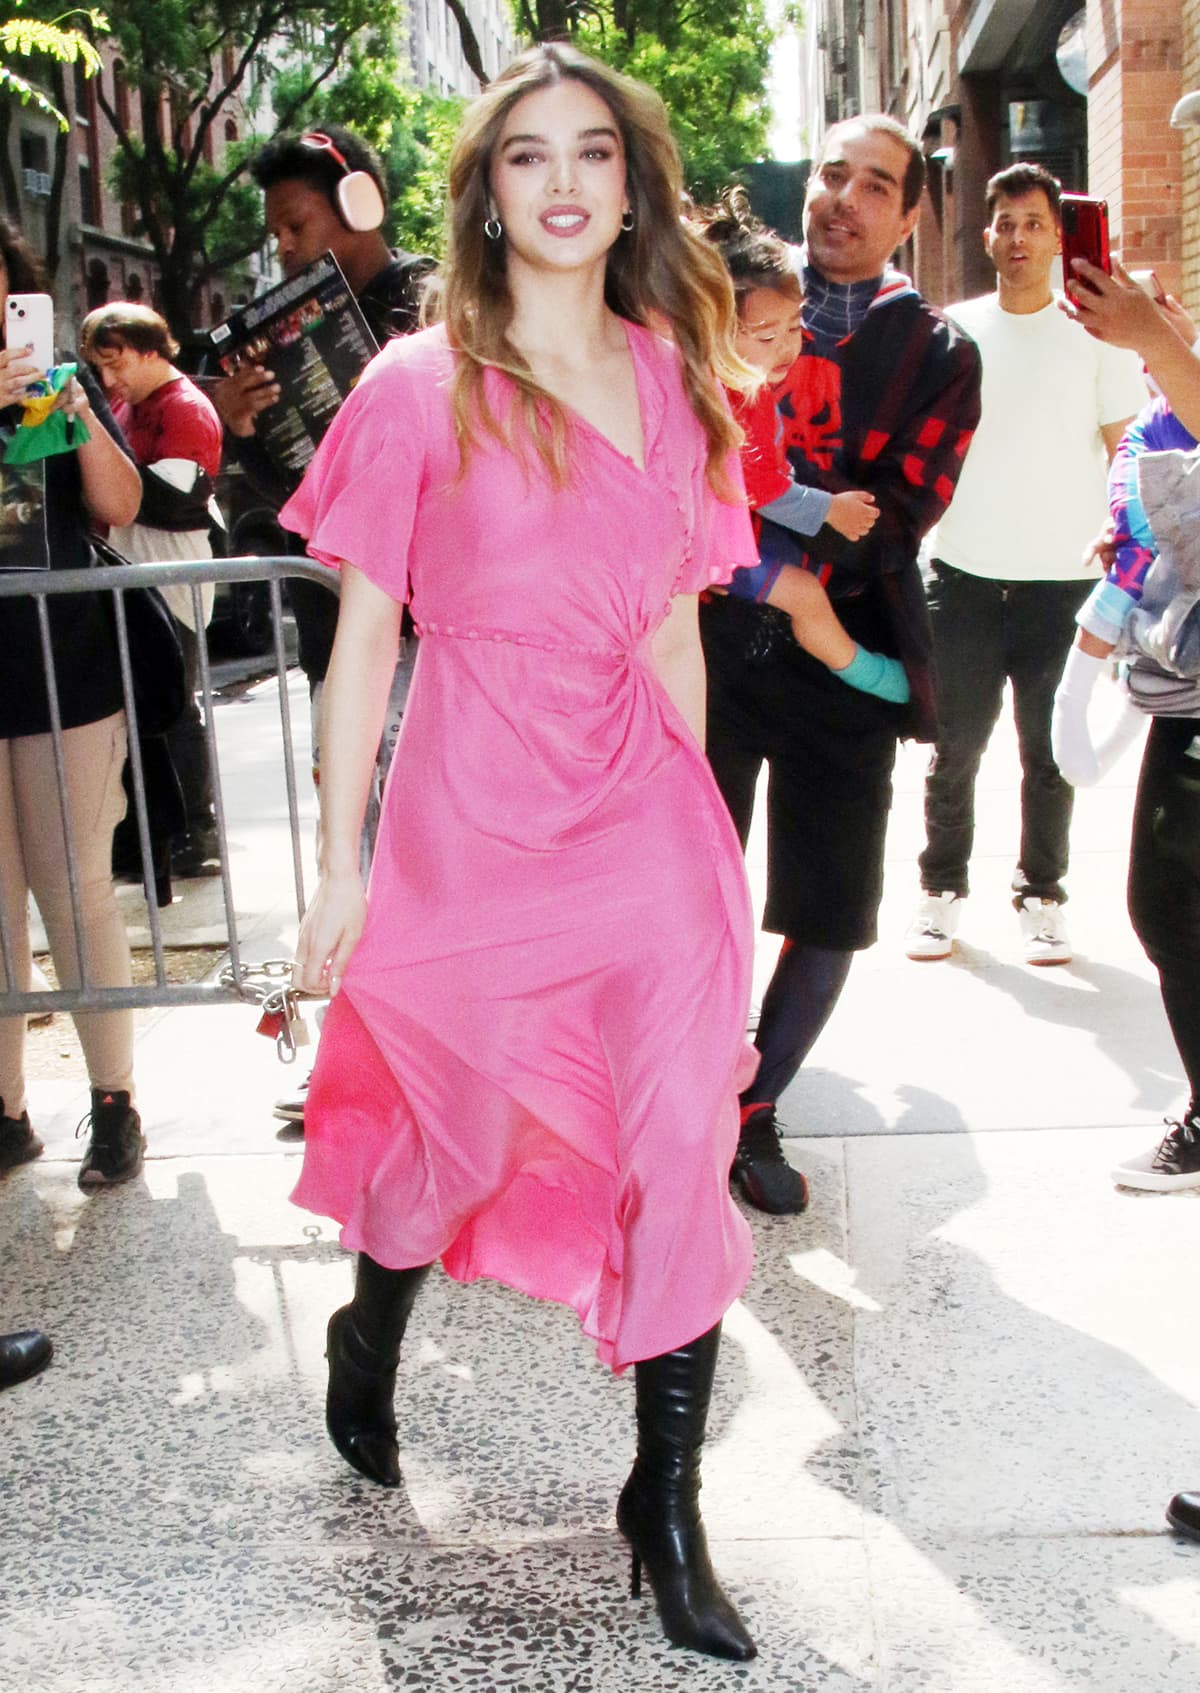 Hailee Steinfeld leaves the ABC studios in a Barbiecore pink asymmetrical dress by Prabal Gurung and black knee-high boots by Femme LA